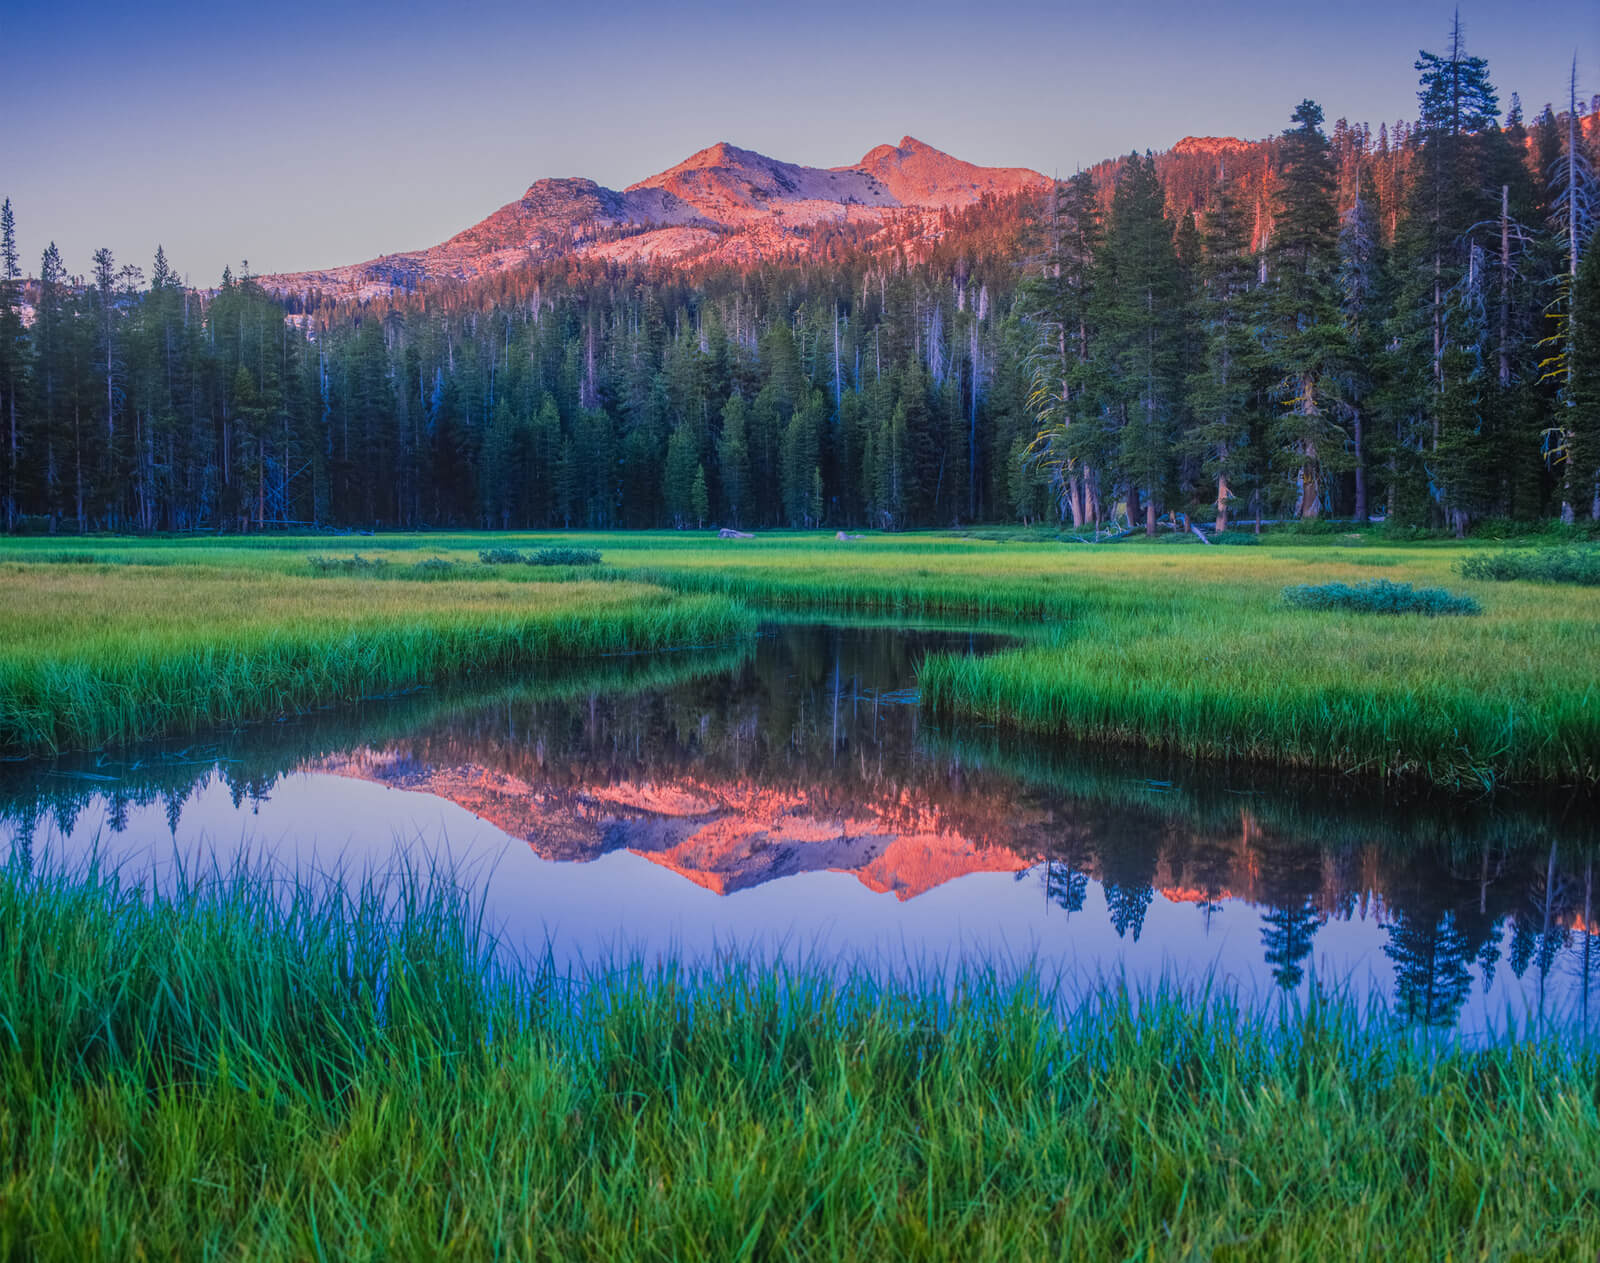 Lake Tahoe at sunrise with mountains bathed in pink light reflected in the still water of the lake